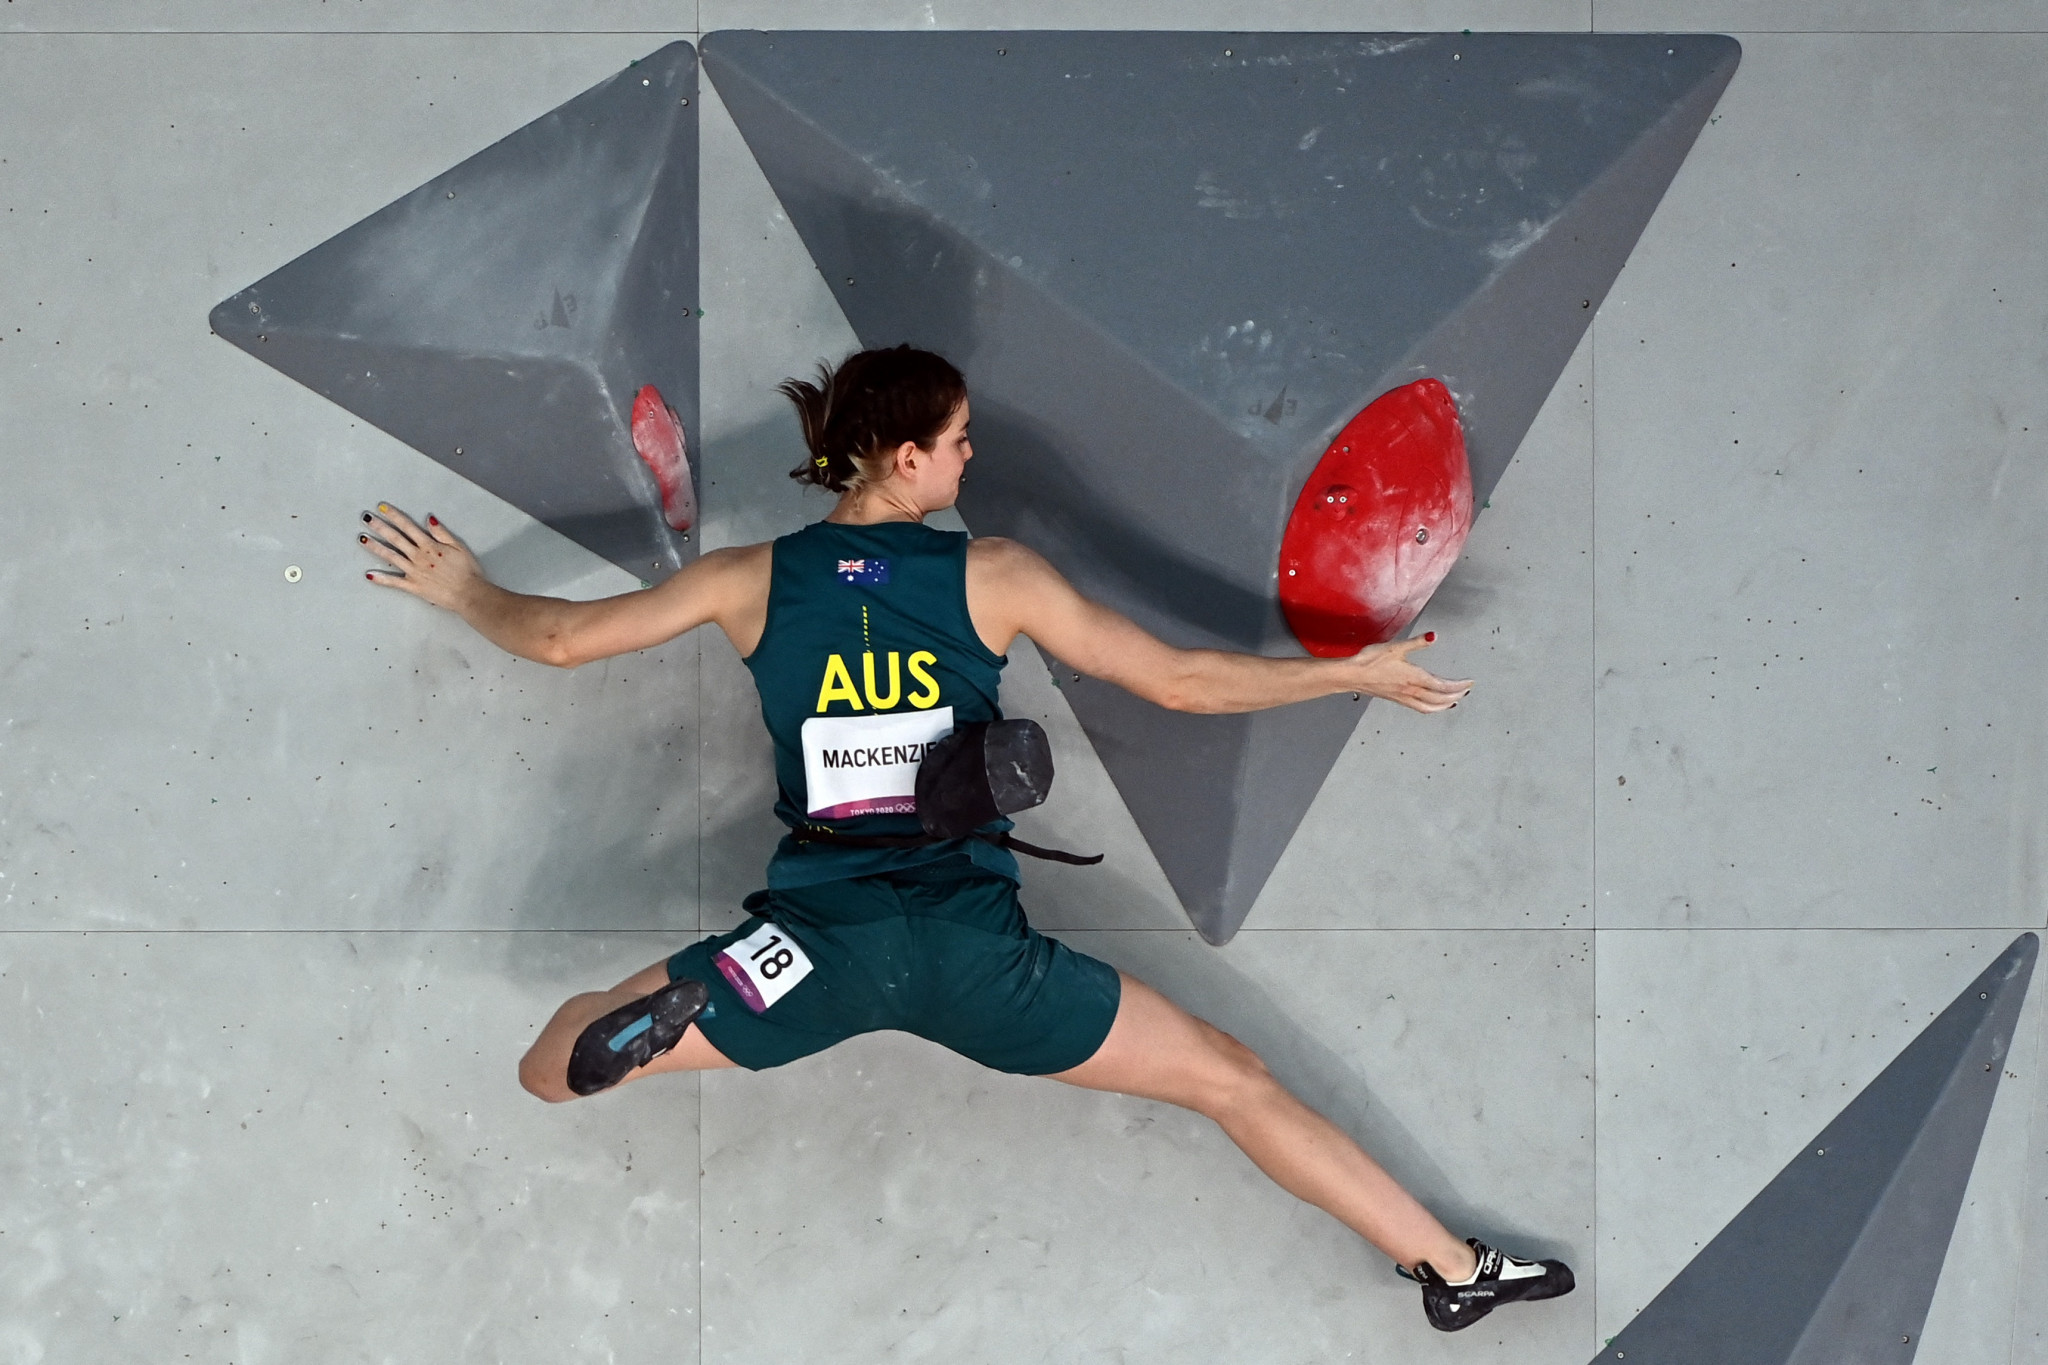 Melbourne named as host of Oceania Olympic qualifier for sport climbing